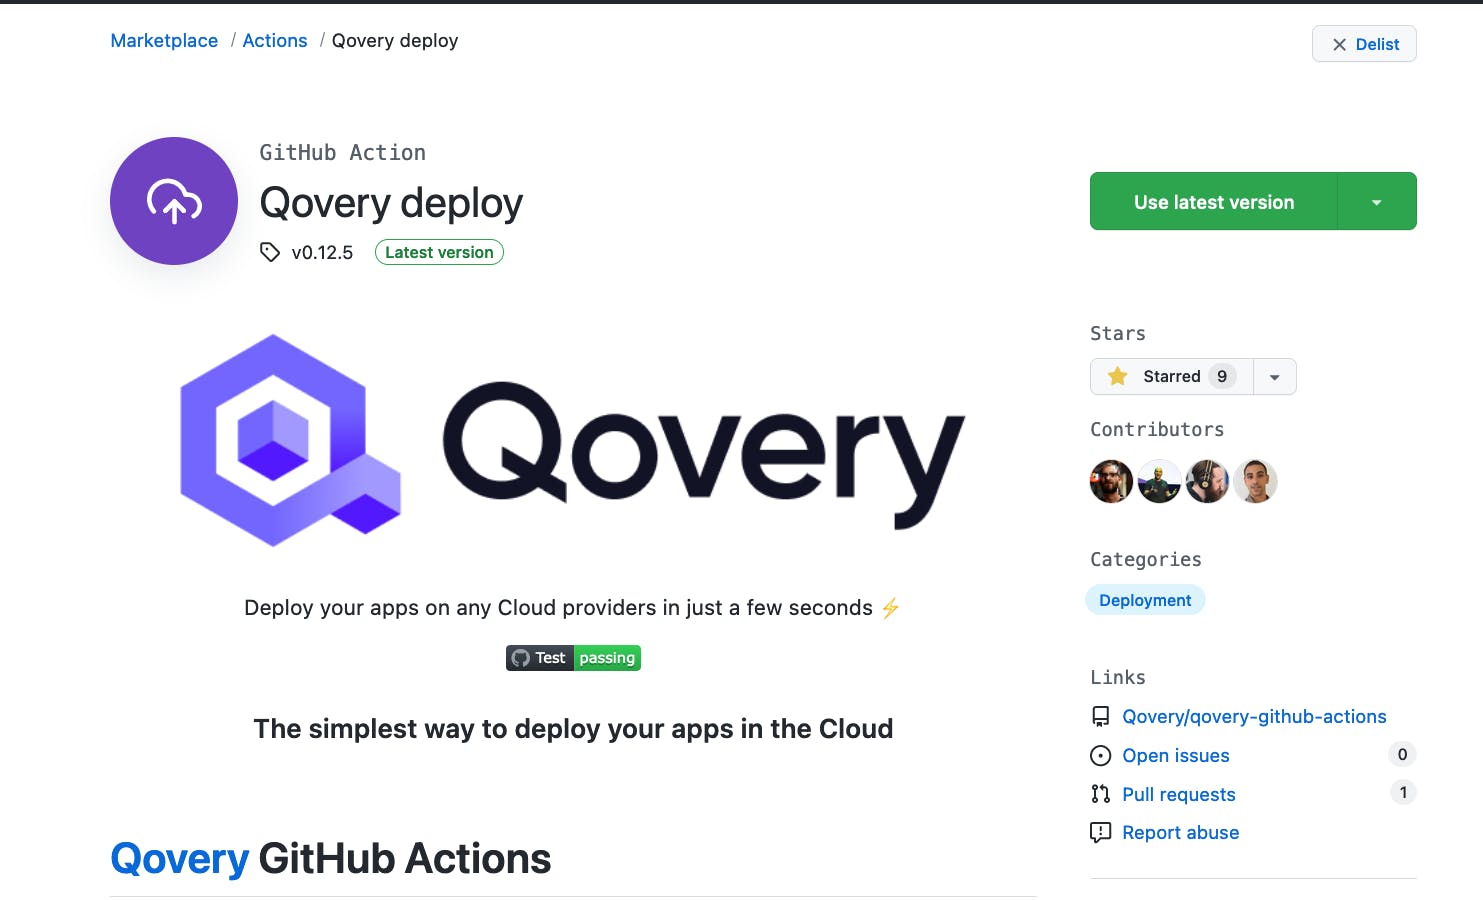 Qovery Github Actions available on the Marketplace